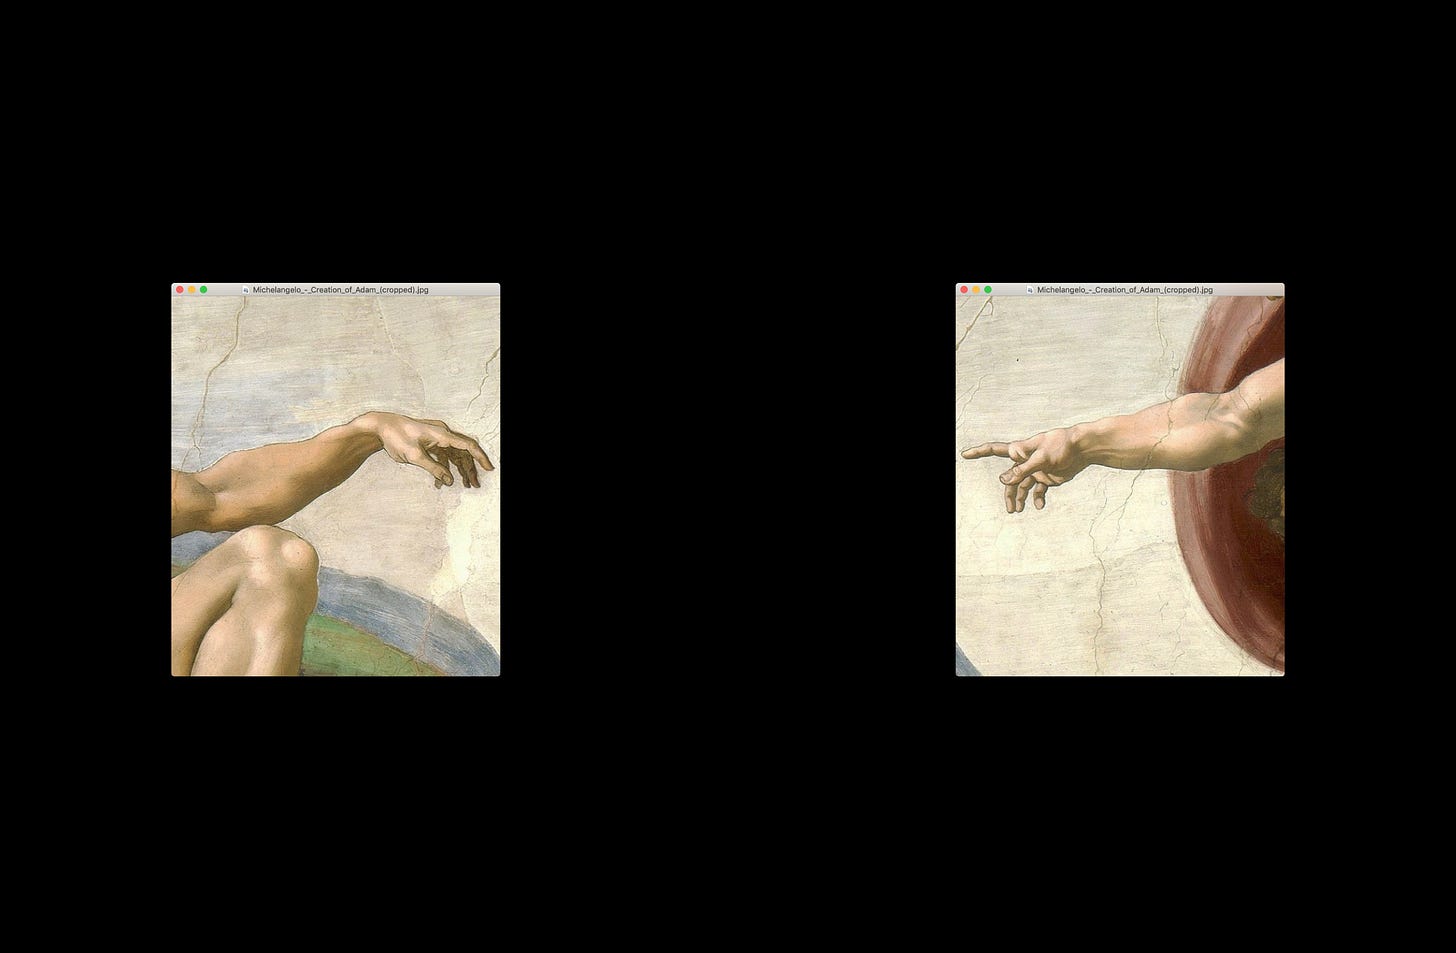 Michelangelo's Creation of Adam cropped into two computer windows. Only hands are shown in full with a black void behind them. 